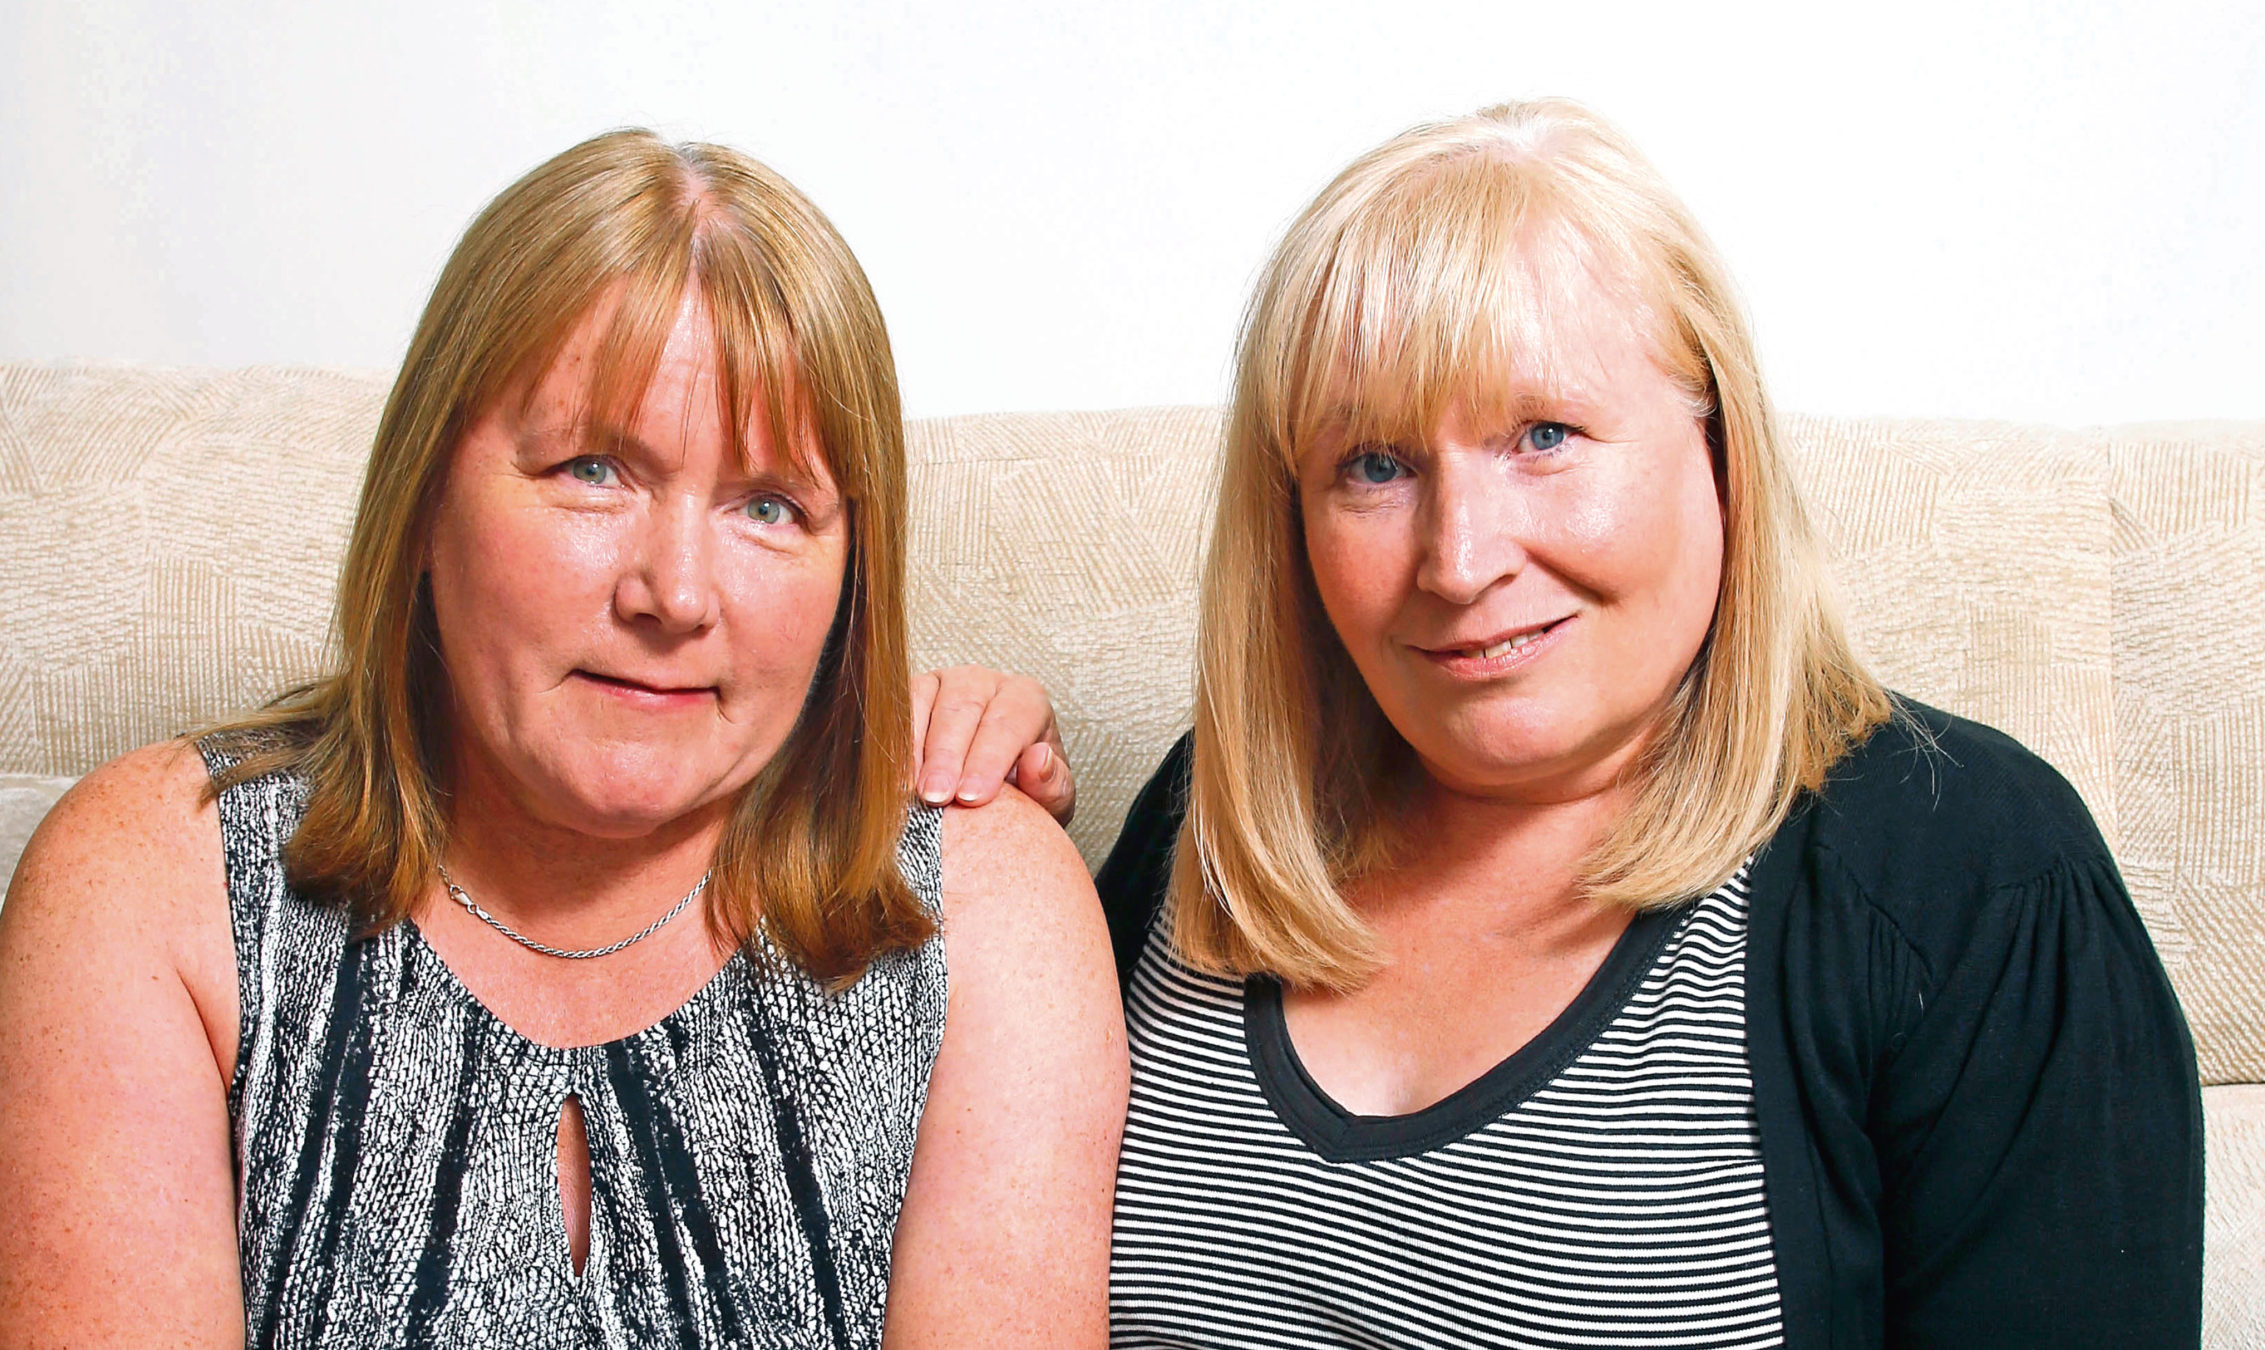 Mesh victims Elaine Holmes (right) and Olive McIlroy